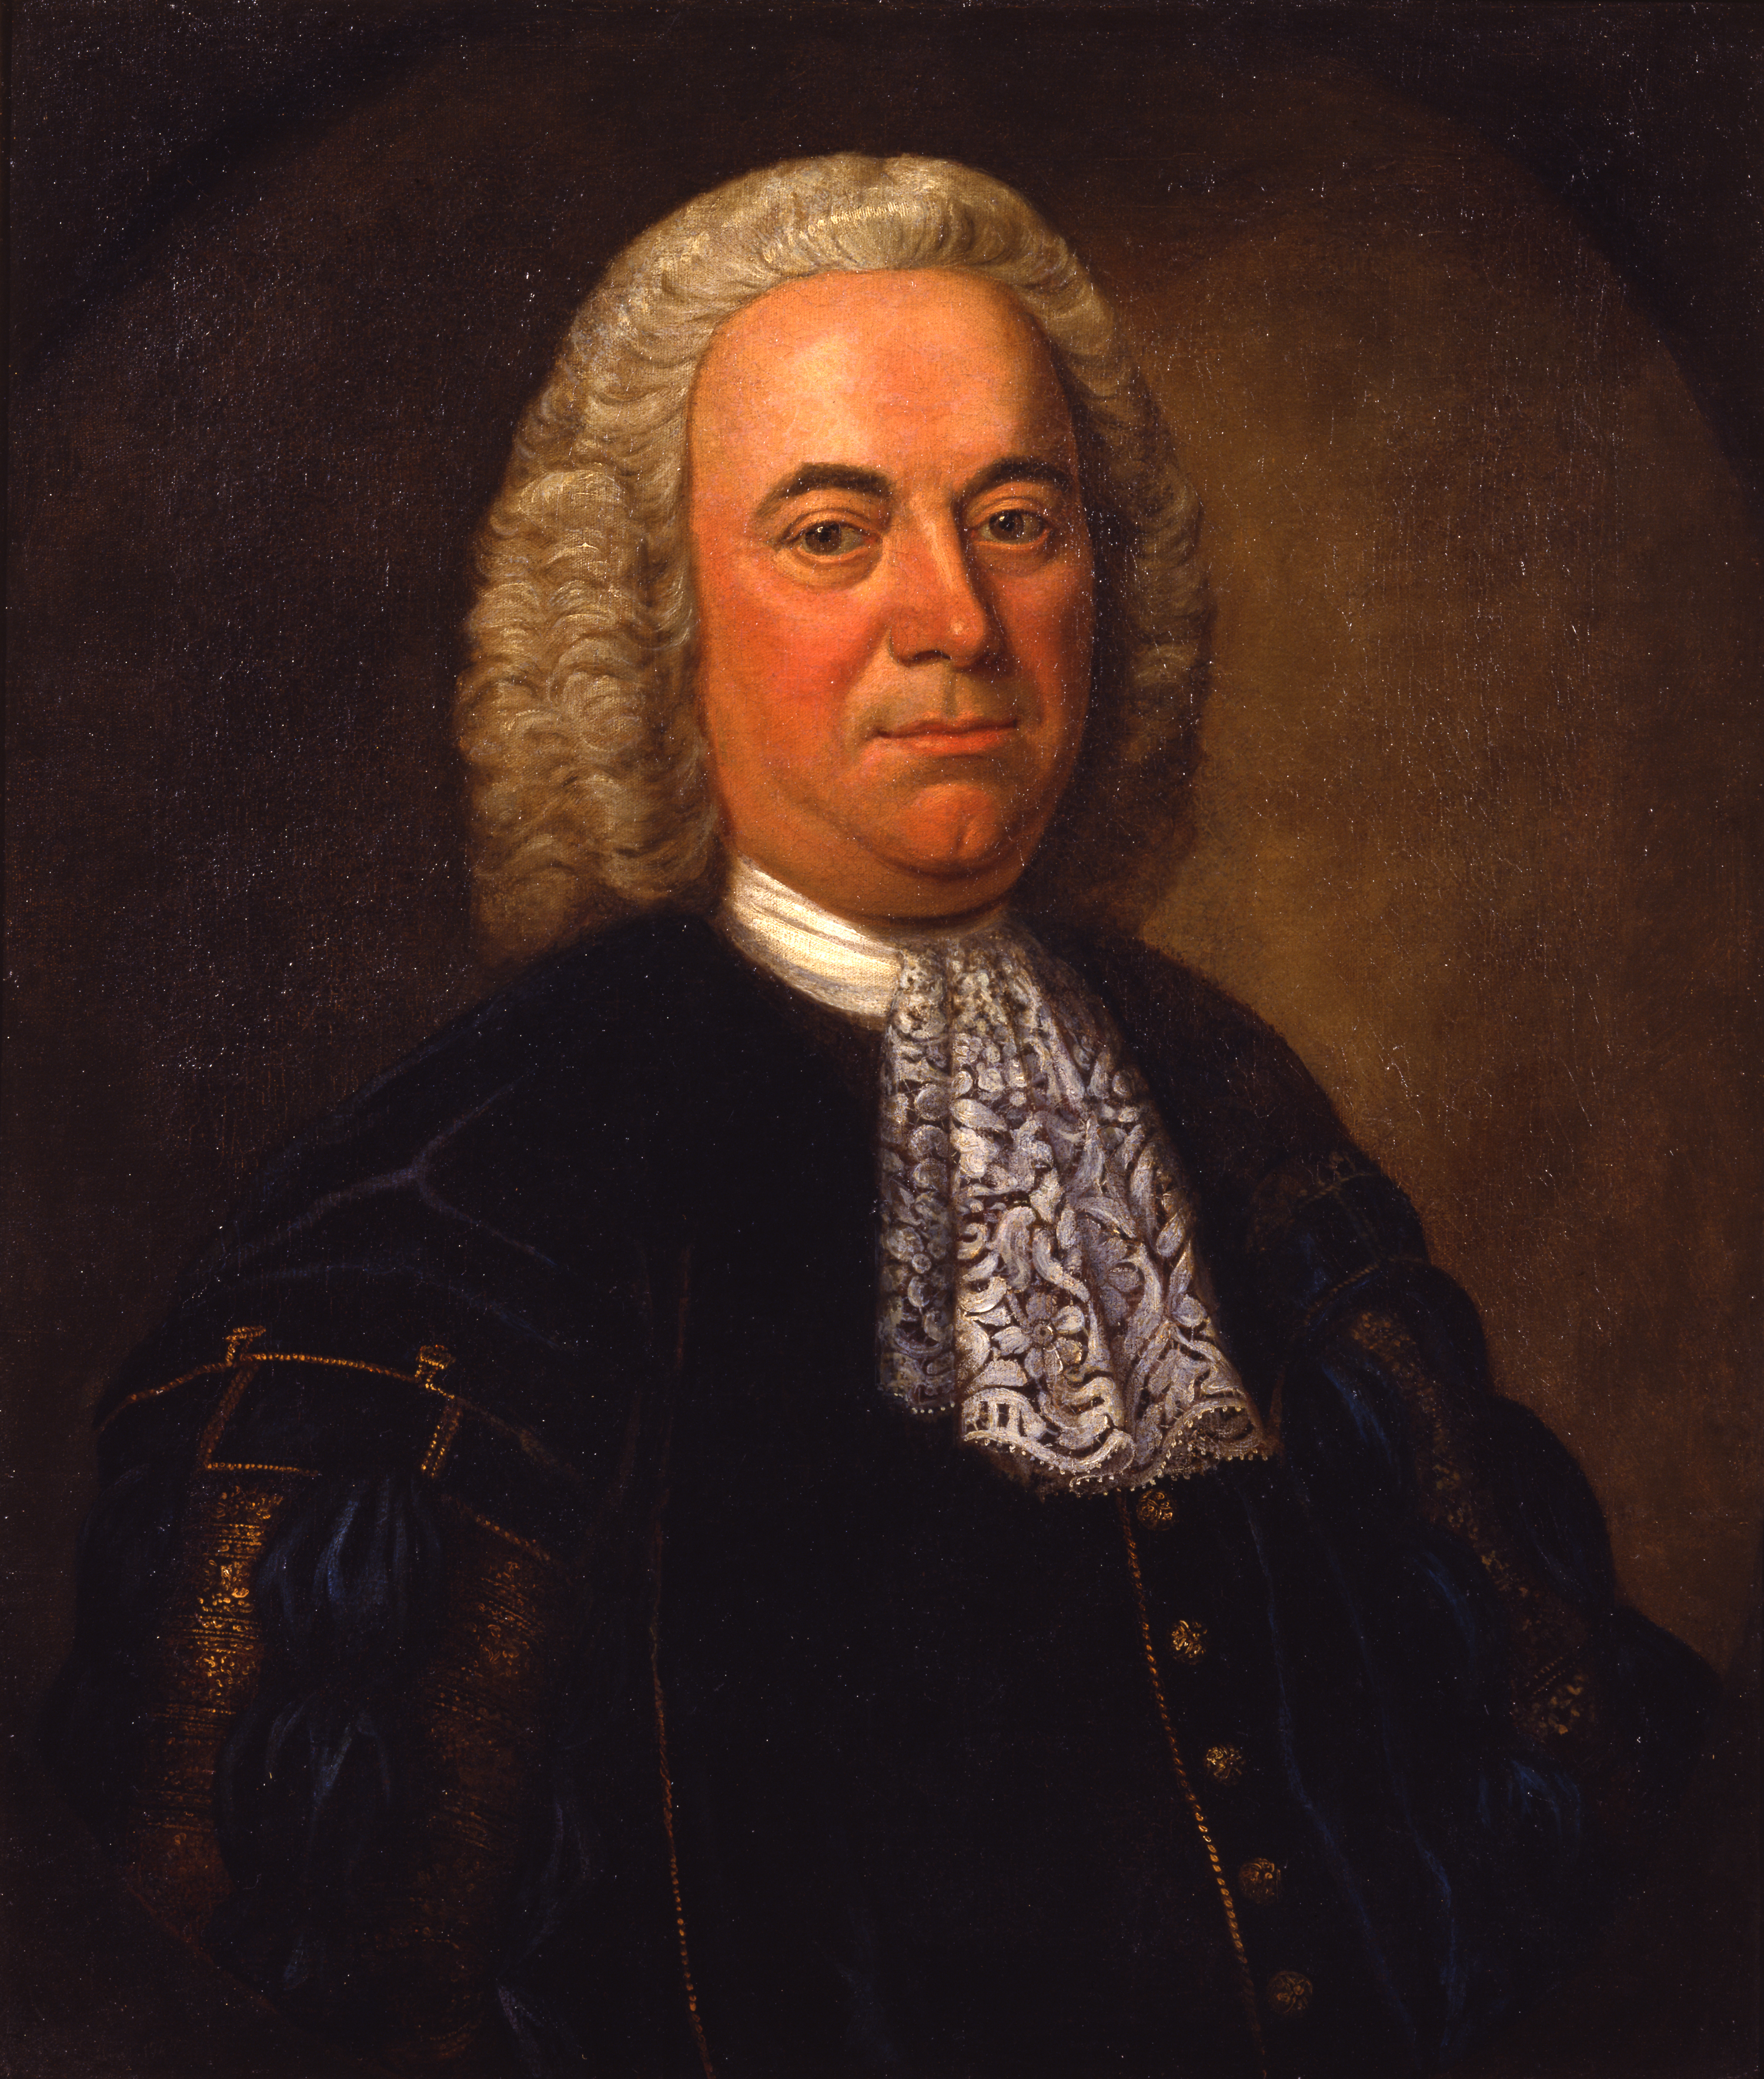 Oil painting of Richard Morton, wearing a wig and cravat, head and shoulders visible.